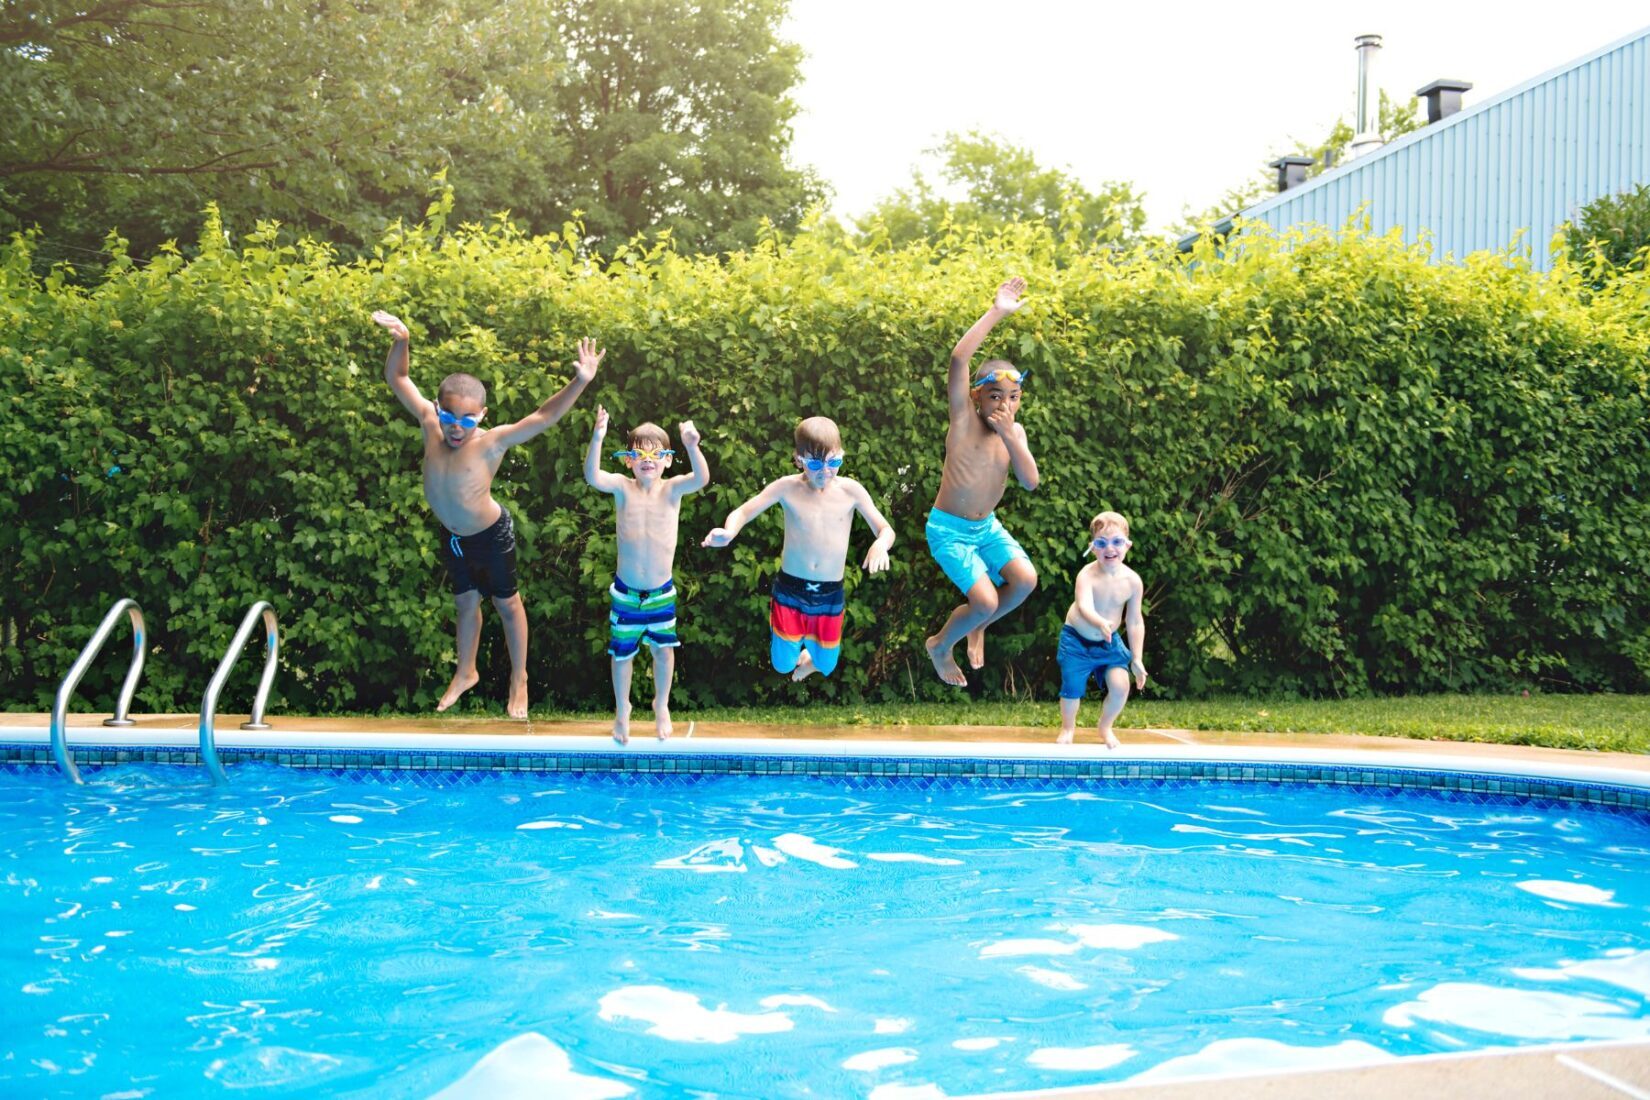 Five kids jumping into the pool.